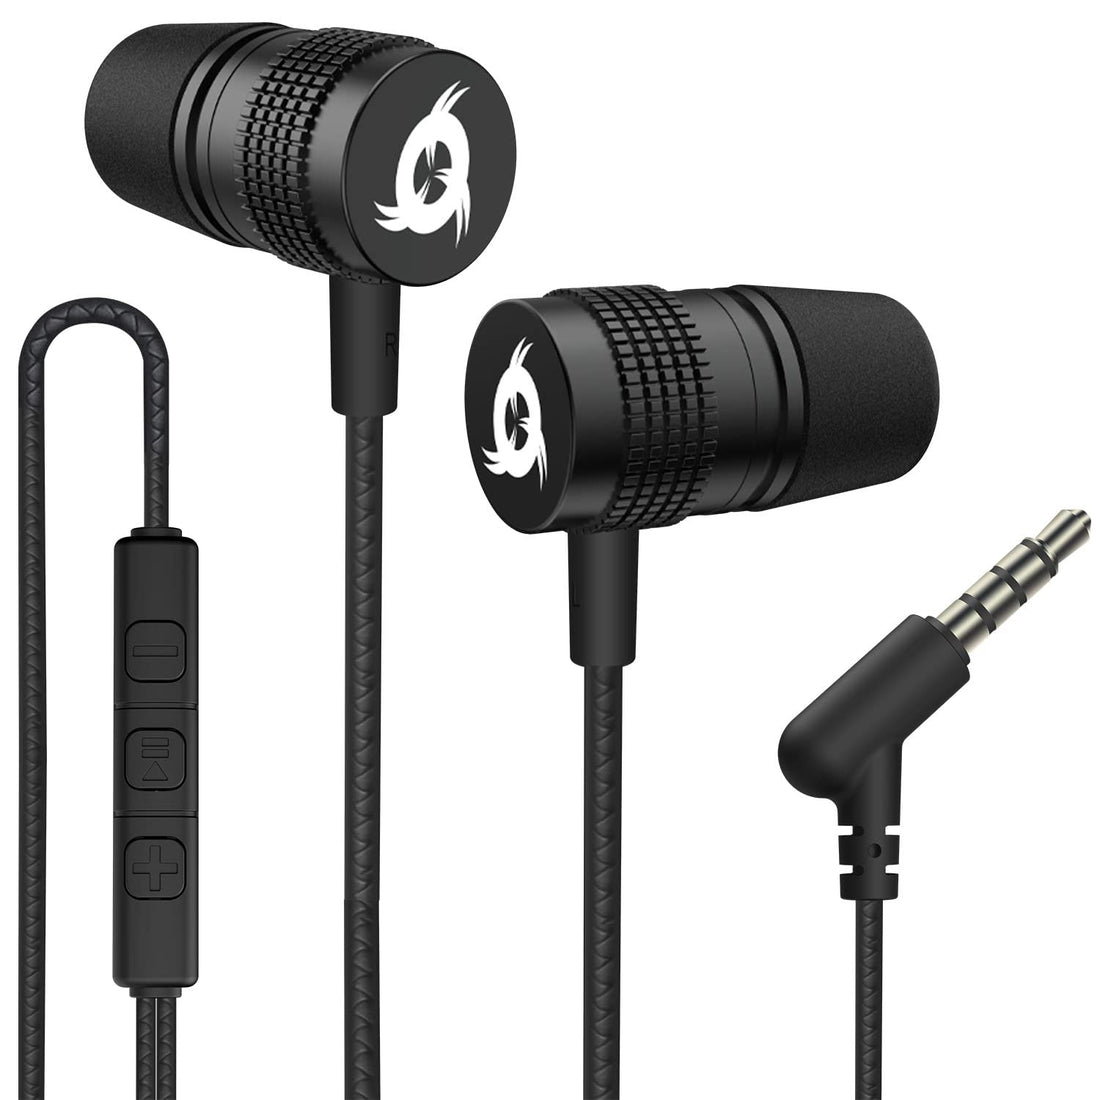 KLIM F1 Earphones with mic + Excellent Audio Quality + Long-Lasting Wired Earphones + 5 Years Warranty + 3.5 mm Jack + Wired Earphones with Memory Foam Tips and Media Controls + New 2023